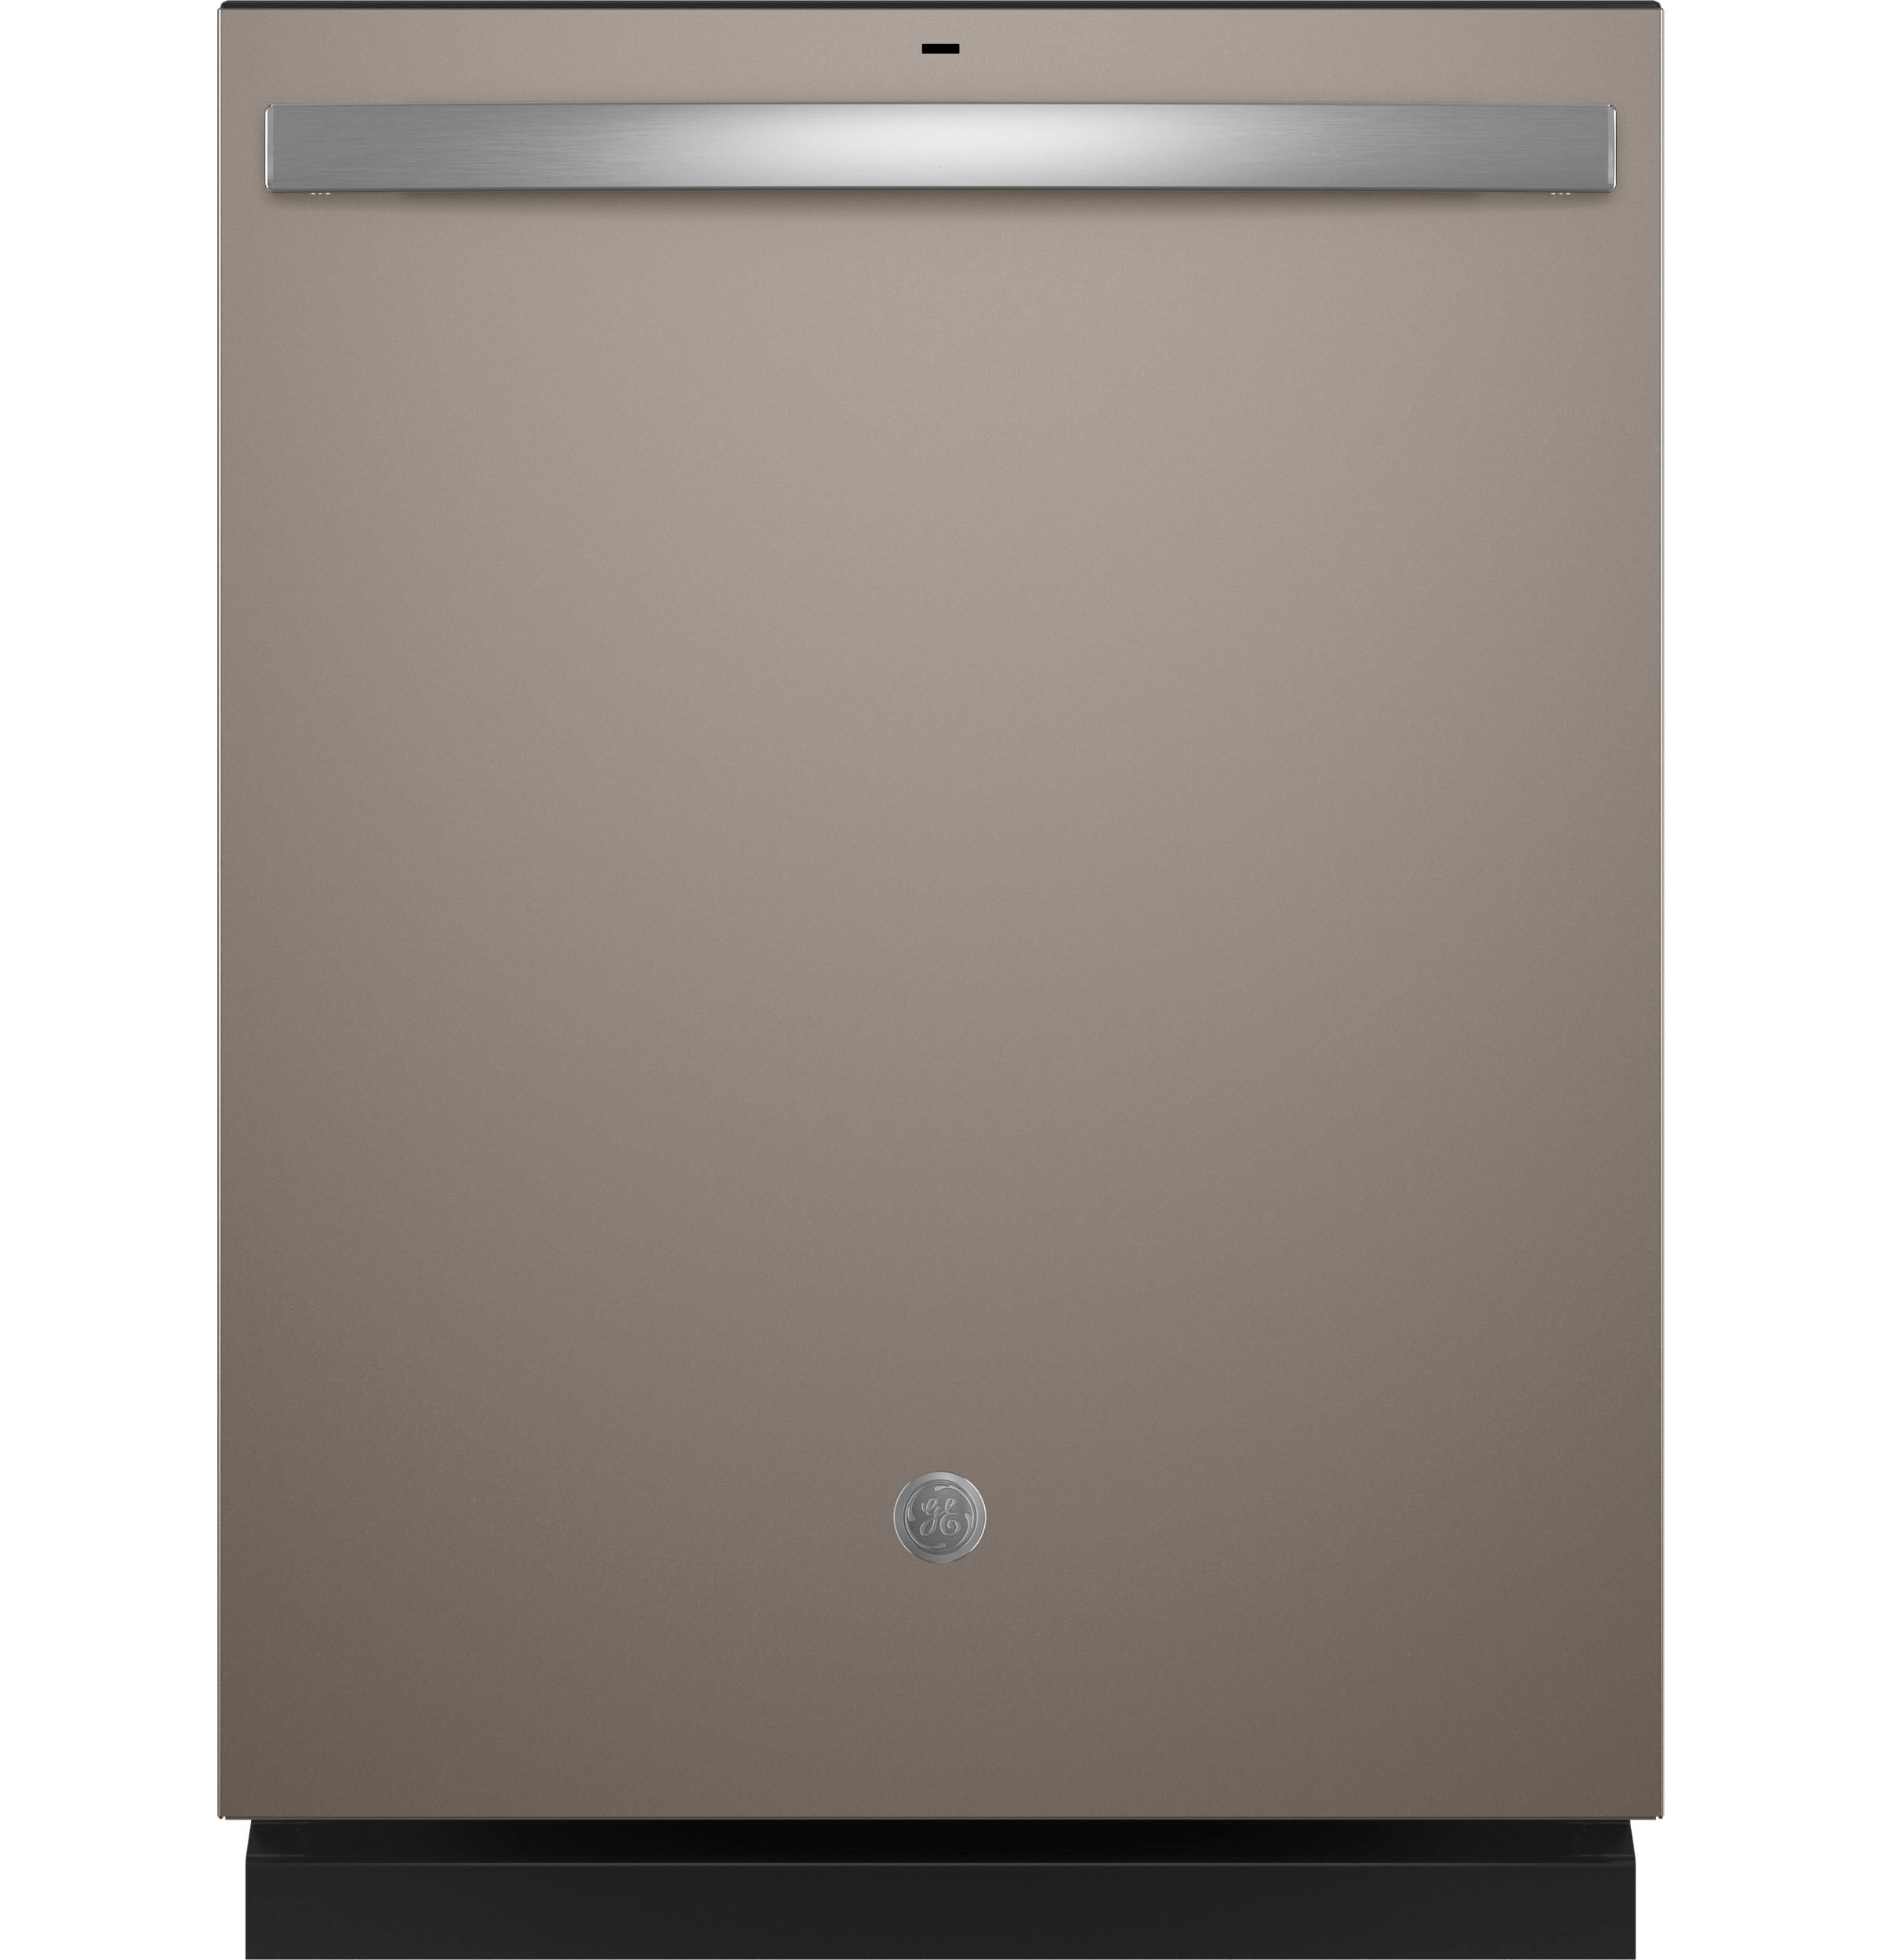 GE - Front Control Dishwasher with Stainless Steel Interior with Sanitize Cycle - Slate